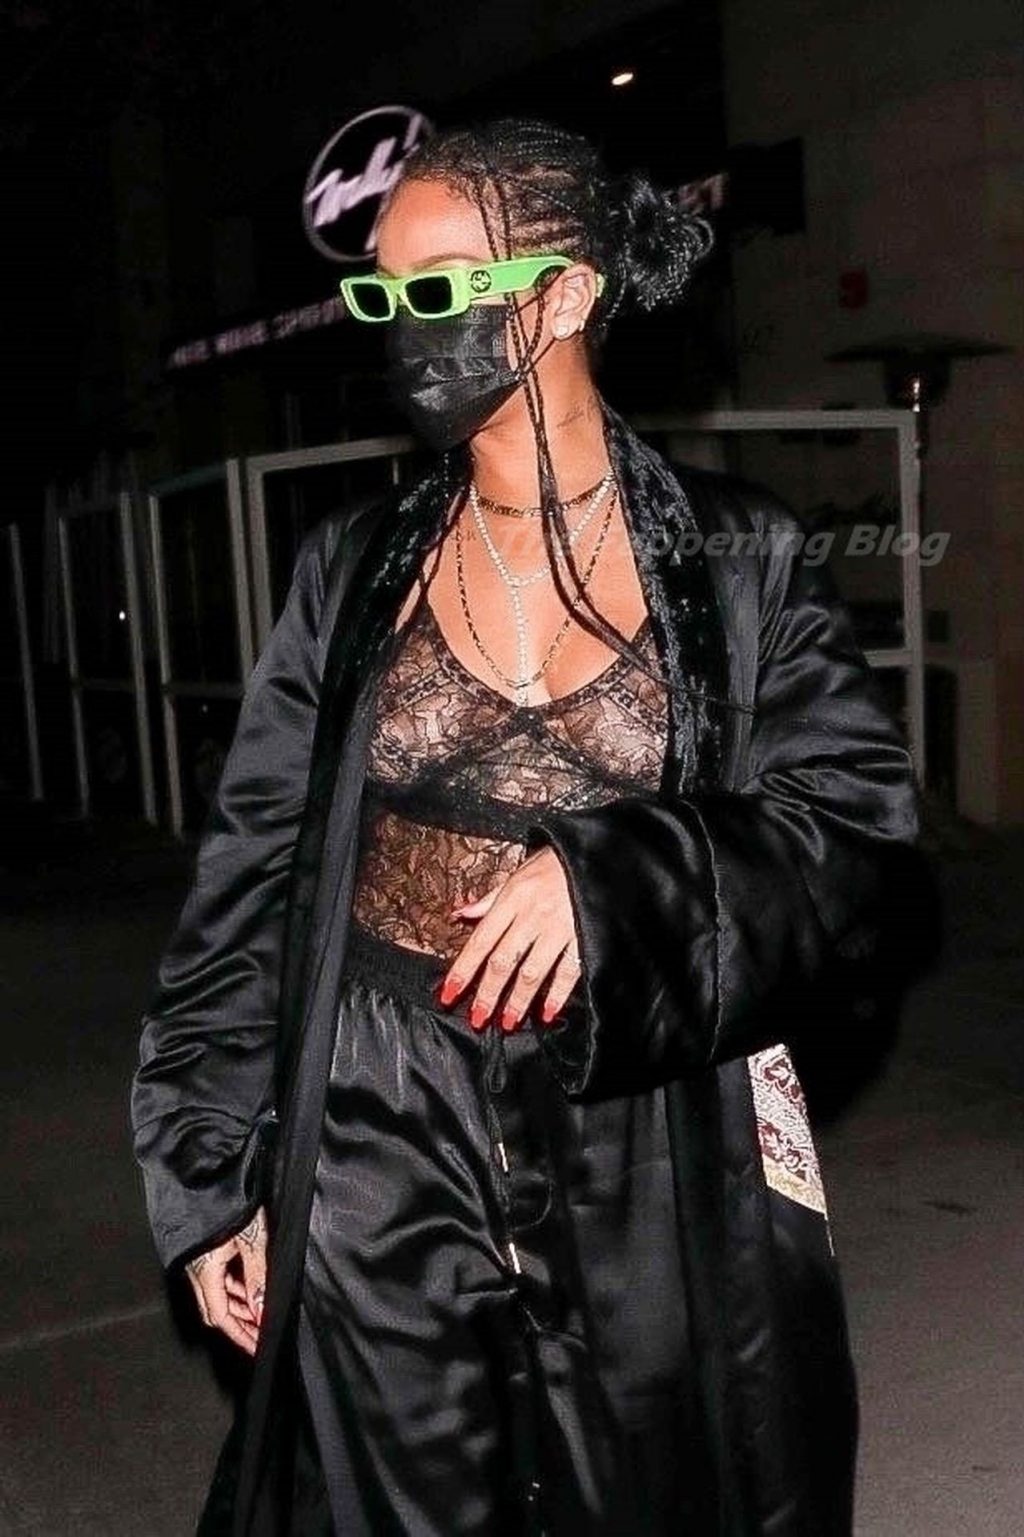 Rihanna Looks Fashionable While Grabbing Dinner at Wally’s in Beverly Hills (77 Photos)